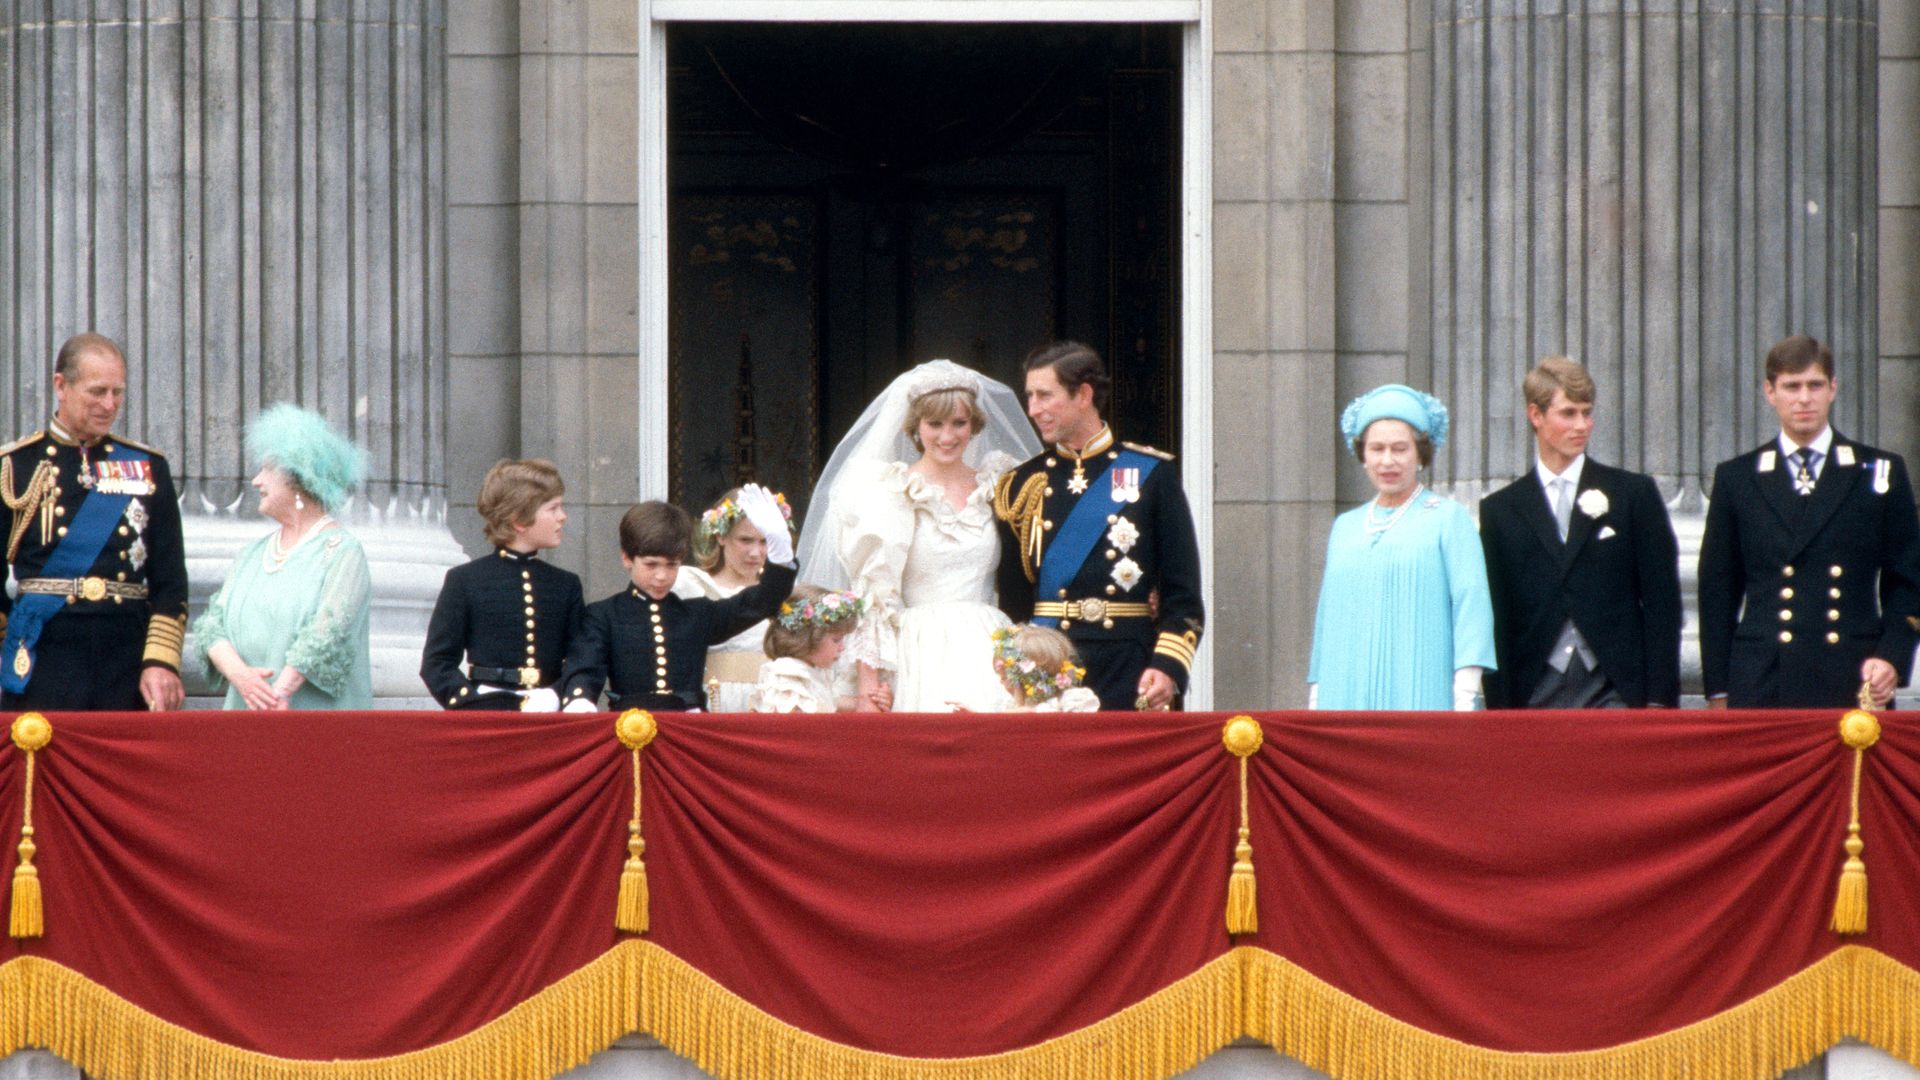 Charles and Diana with family on the balcony of Buckingham Palace following their wedding